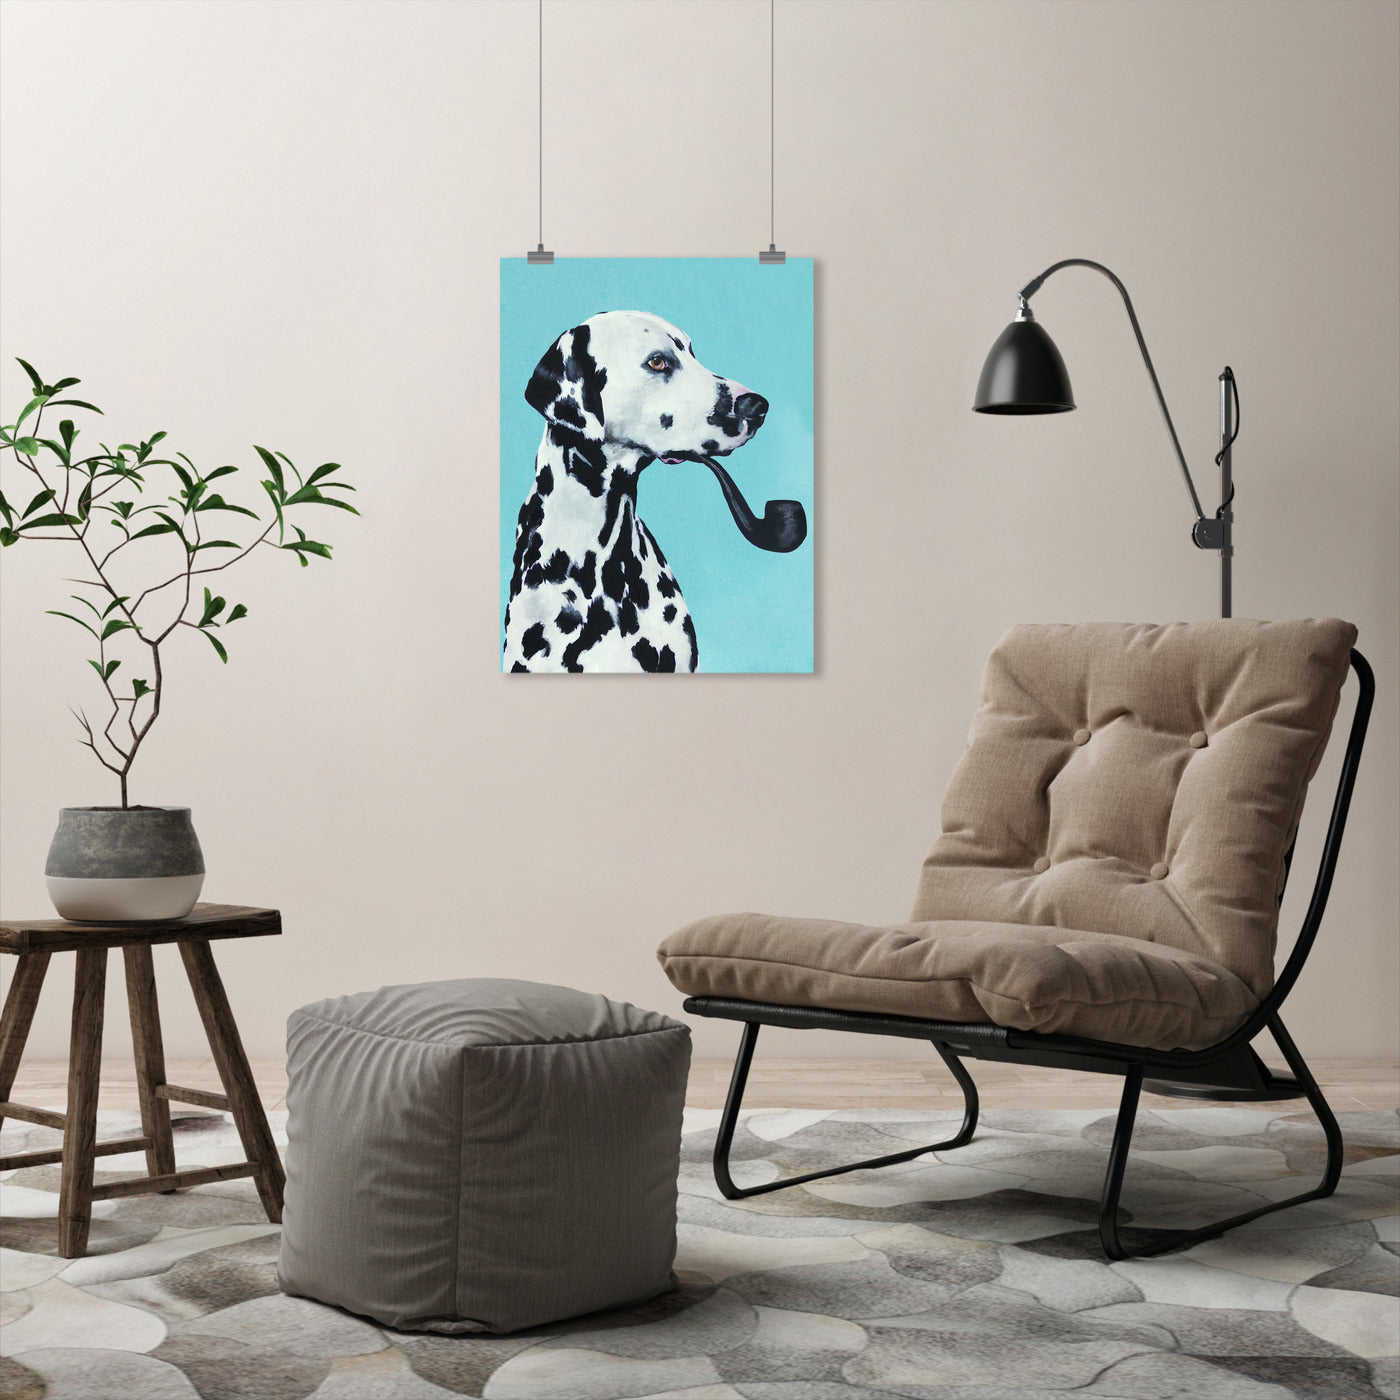 Dalmatian With Pipe In Blue by Coco de Paris - Art Print - Americanflat